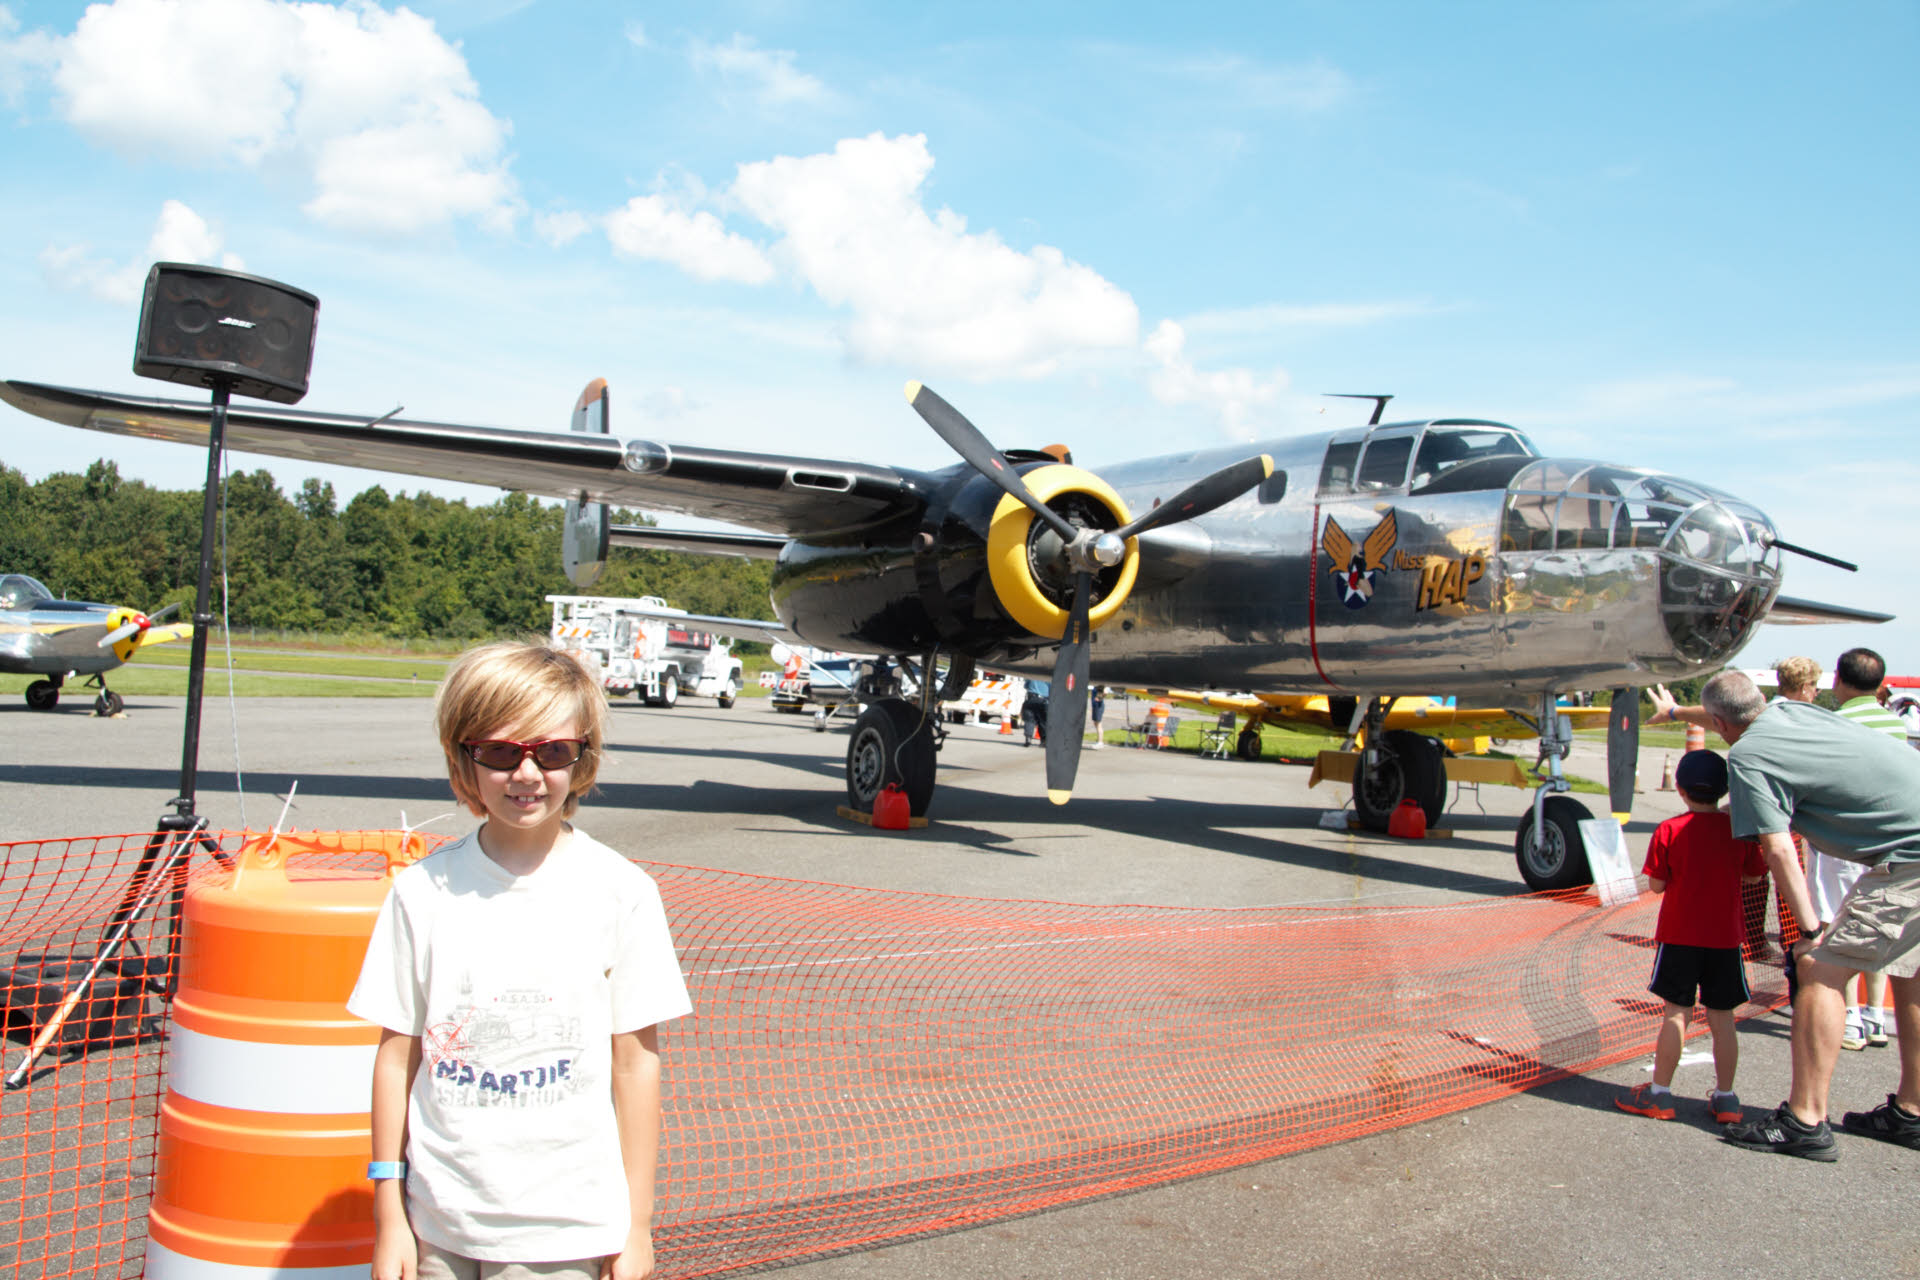 With a B-25 at the Greenwood Lake Airshow